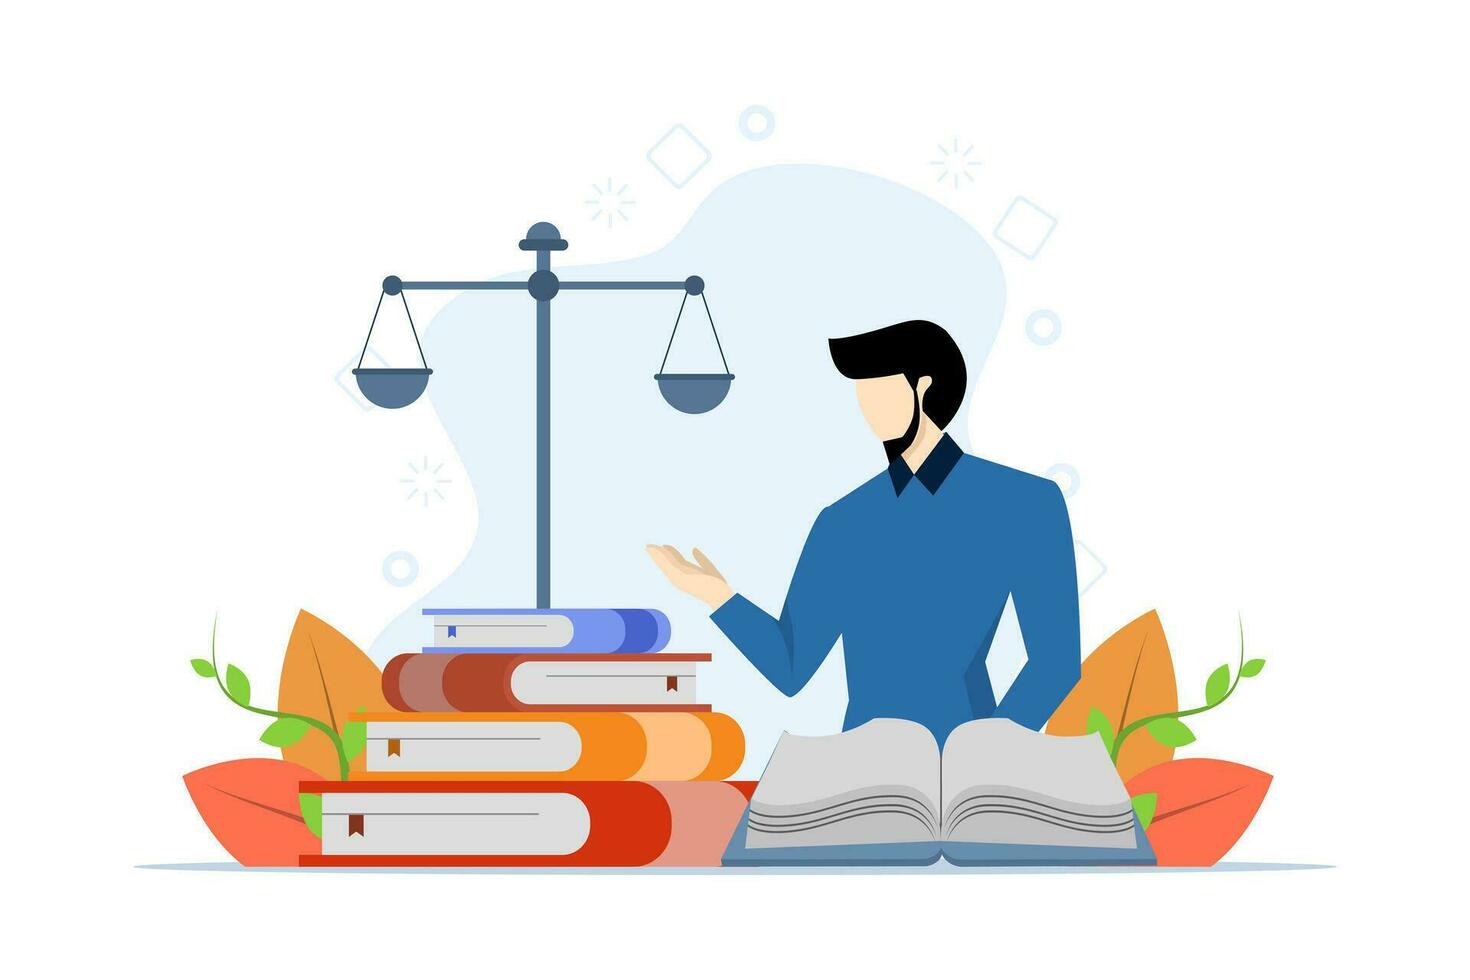 the concept of legal advice as the opinion of a professional lawyer. law firms and legal services, lawyer consultants. Government legal consulting services. flat vector illustration on background.